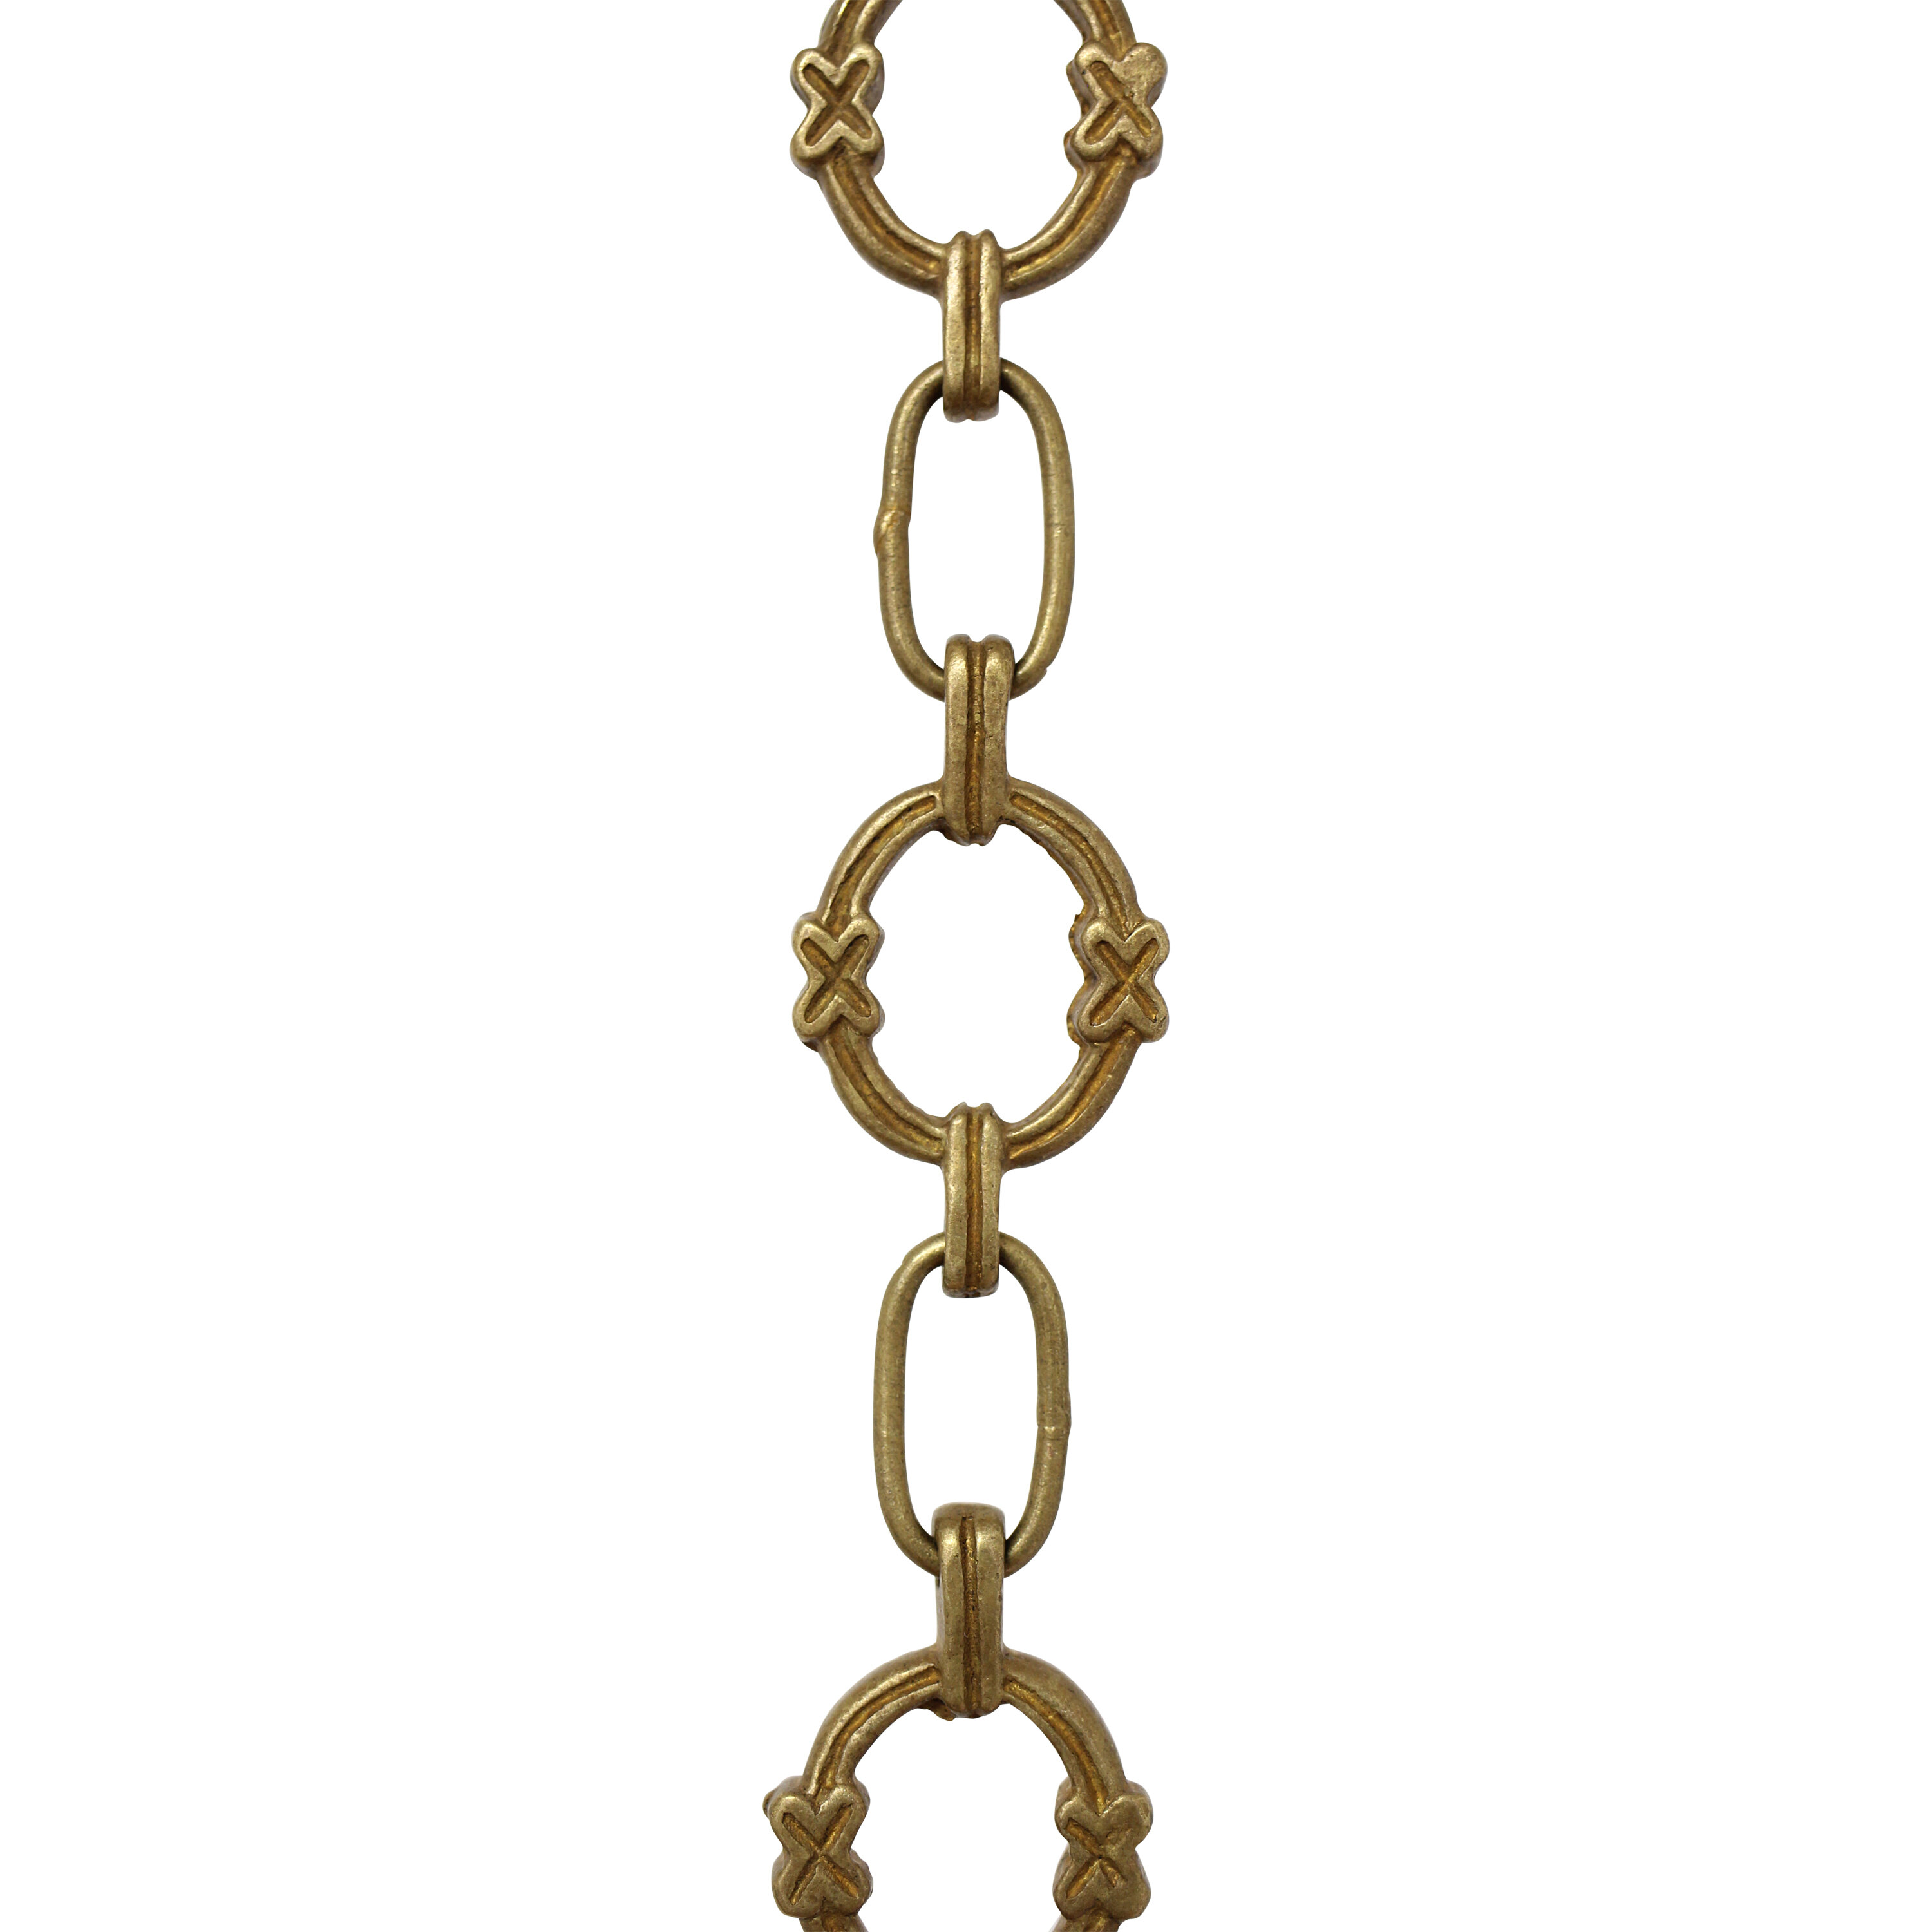 RCH Hardware CH-12-AD-3 Decorative Solid Chain for Hanging Chandeliers and Pendant Lighting-Rectangular and Circular Design Unwelded Links 